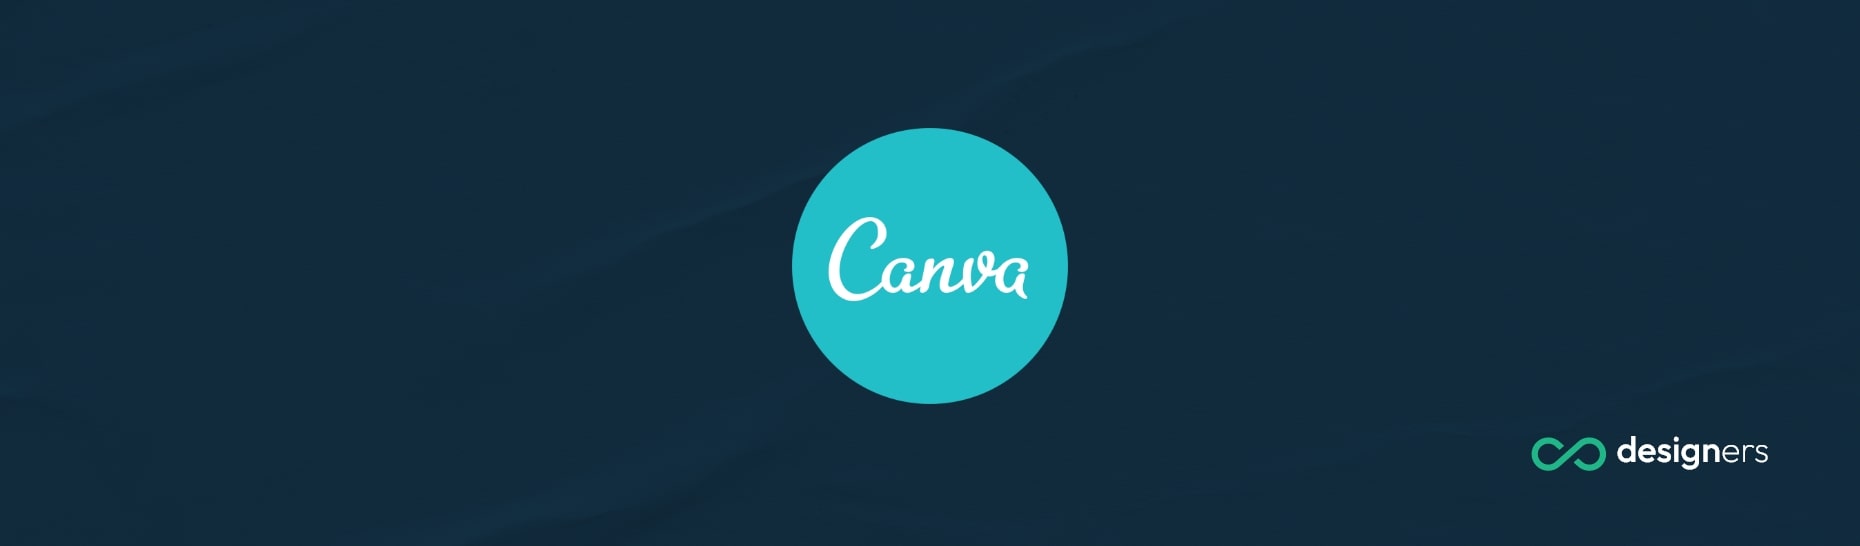 Why Is Canva Valued So High?